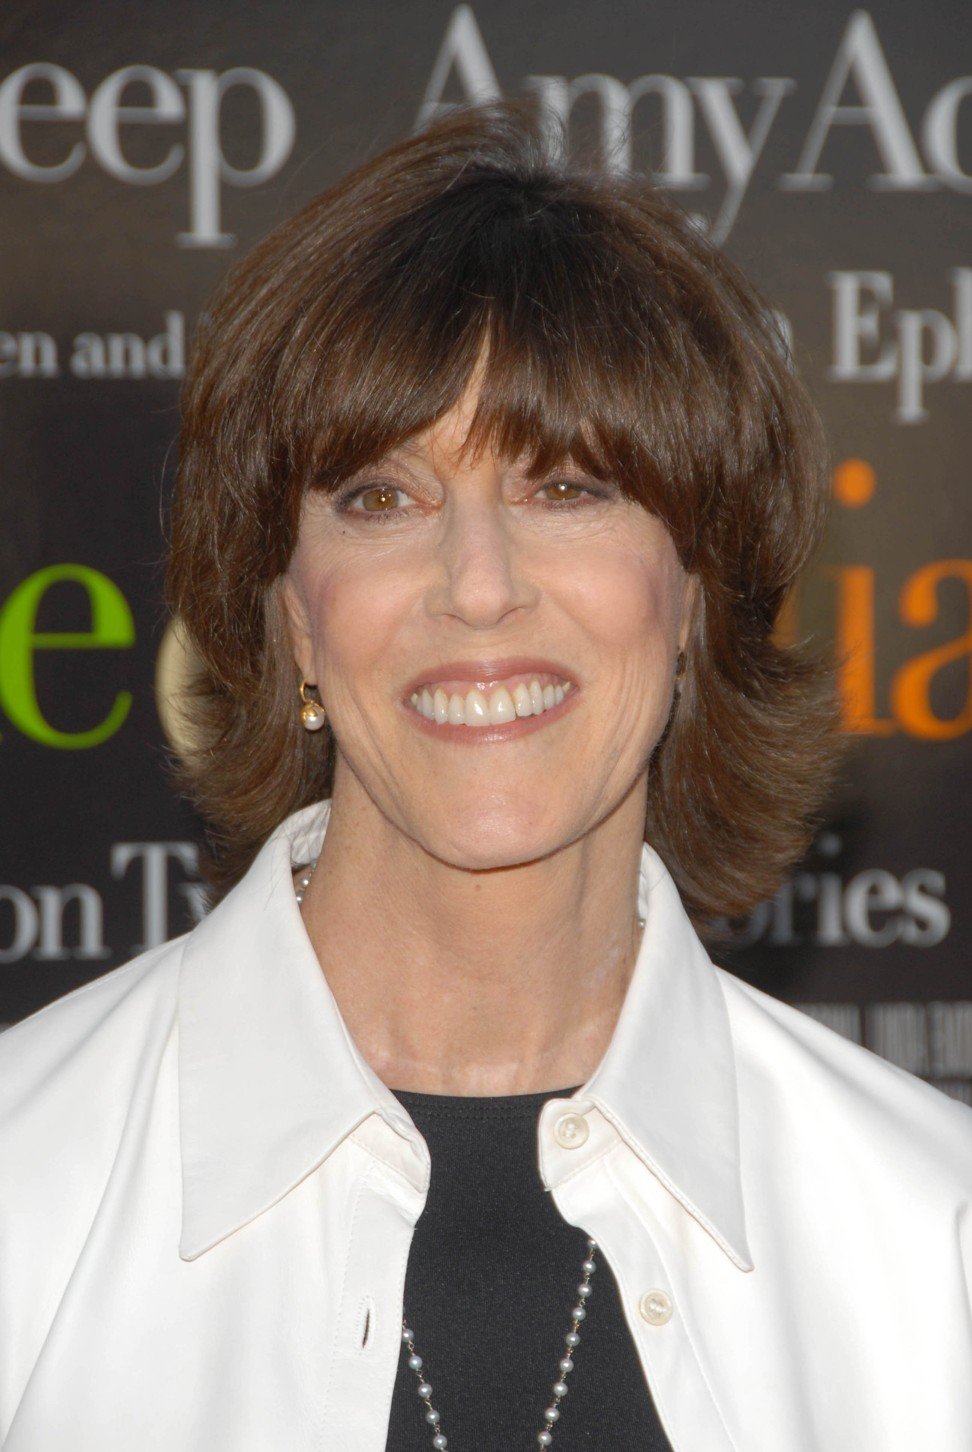 Nora Ephron is the author is I Feel Bad About My Neck. Photo: Shutterstock